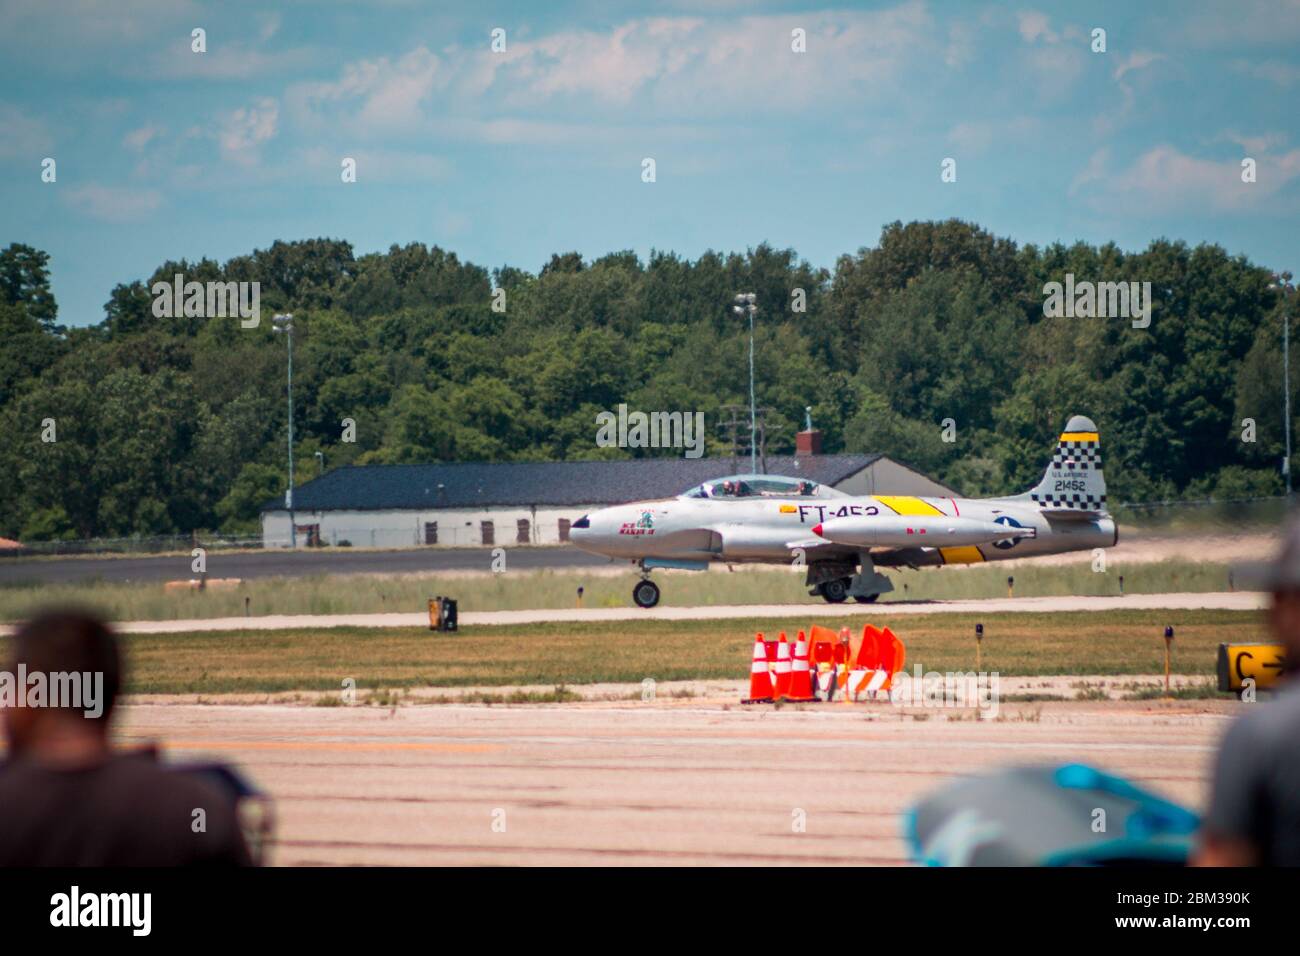 Fighter jet landing at an airshow in Battle Creek Michigan Stock Photo